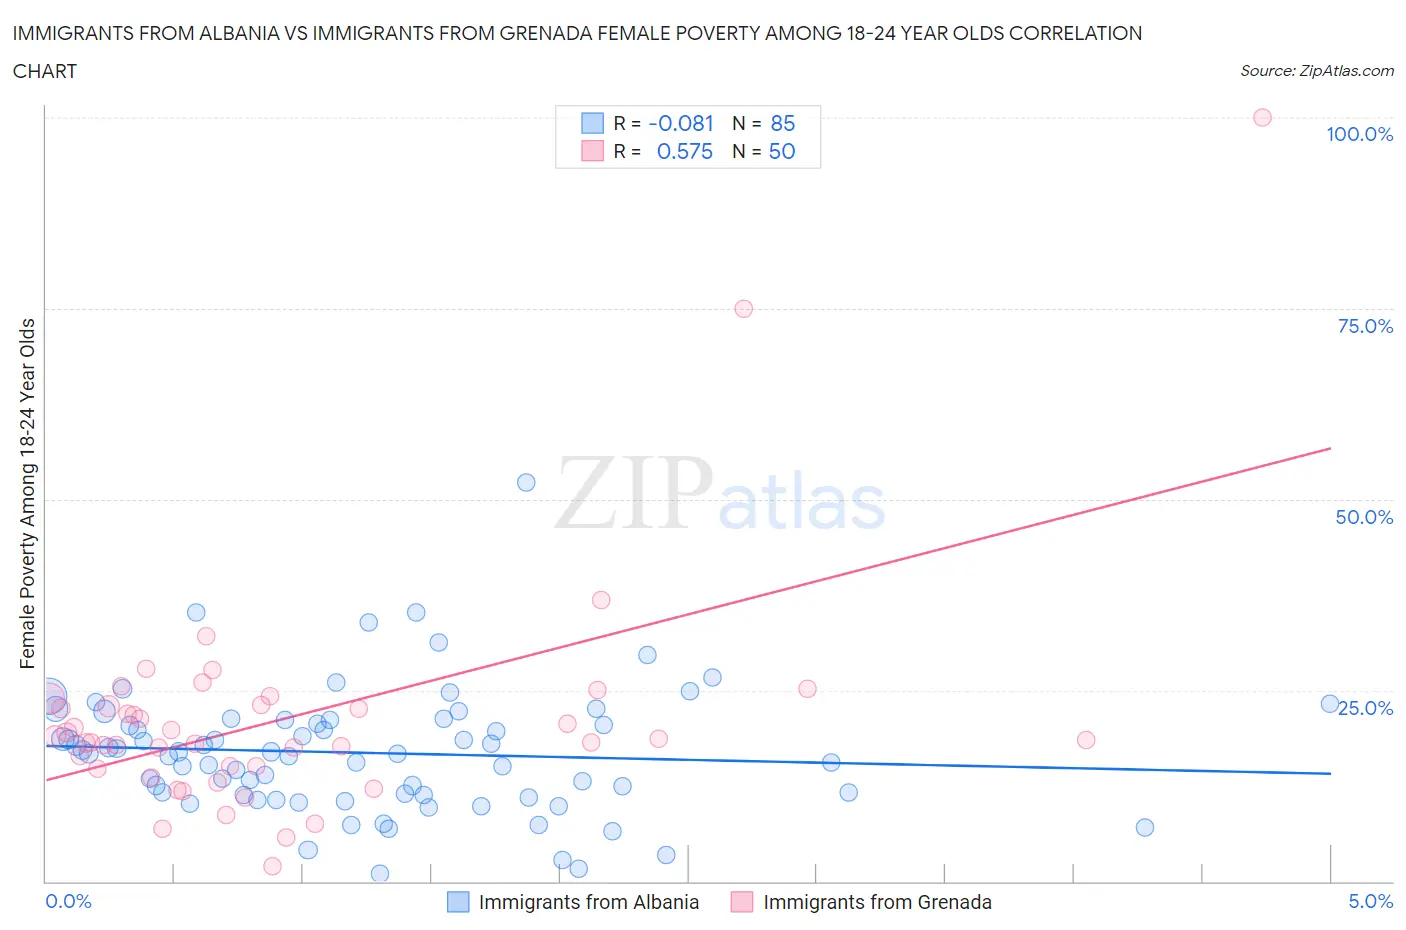 Immigrants from Albania vs Immigrants from Grenada Female Poverty Among 18-24 Year Olds